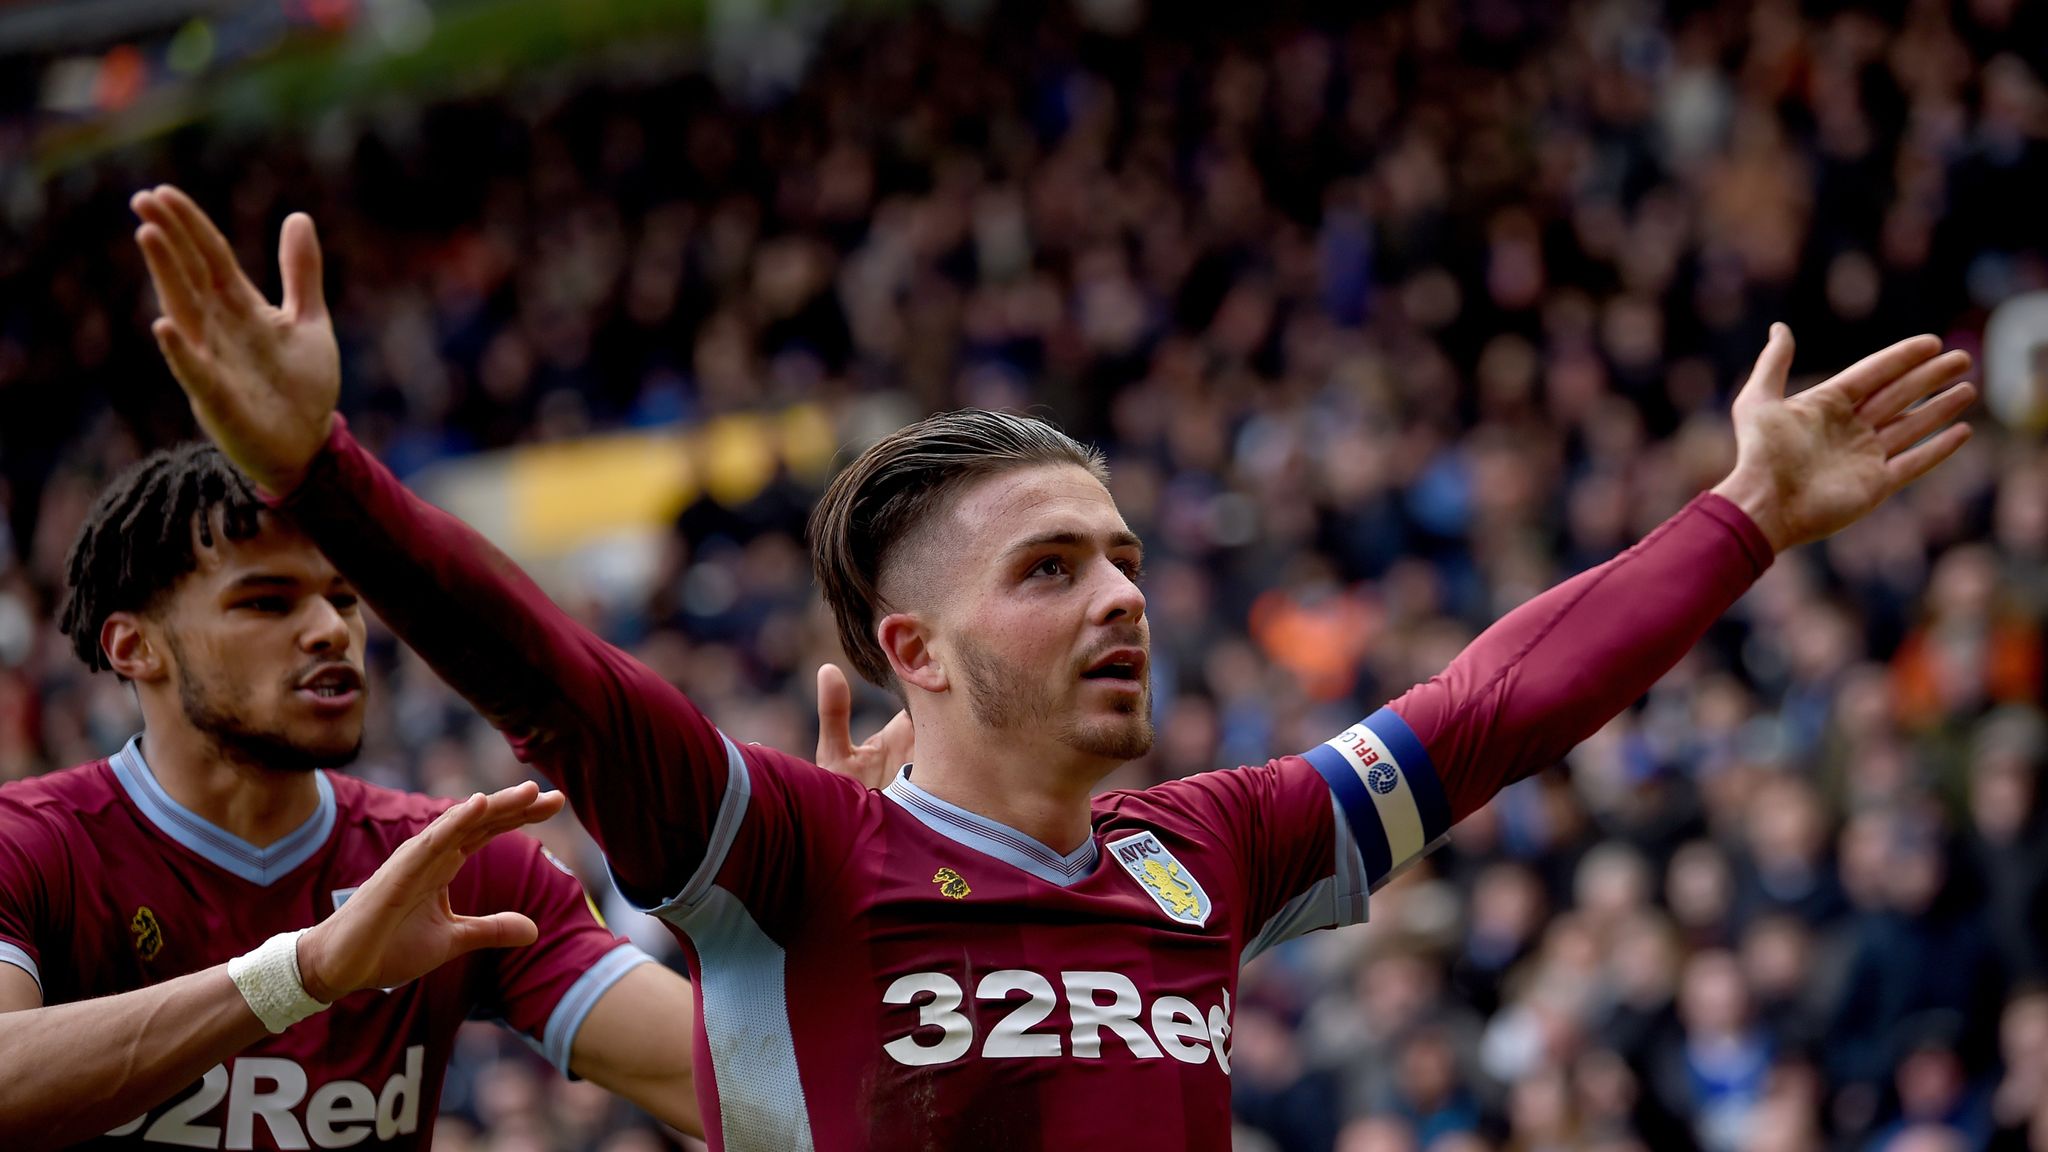 Aston Villa S Jack Grealish Hails Best Day Of His Life Despite Fan Attack During Birmingham Game Football News Sky Sports